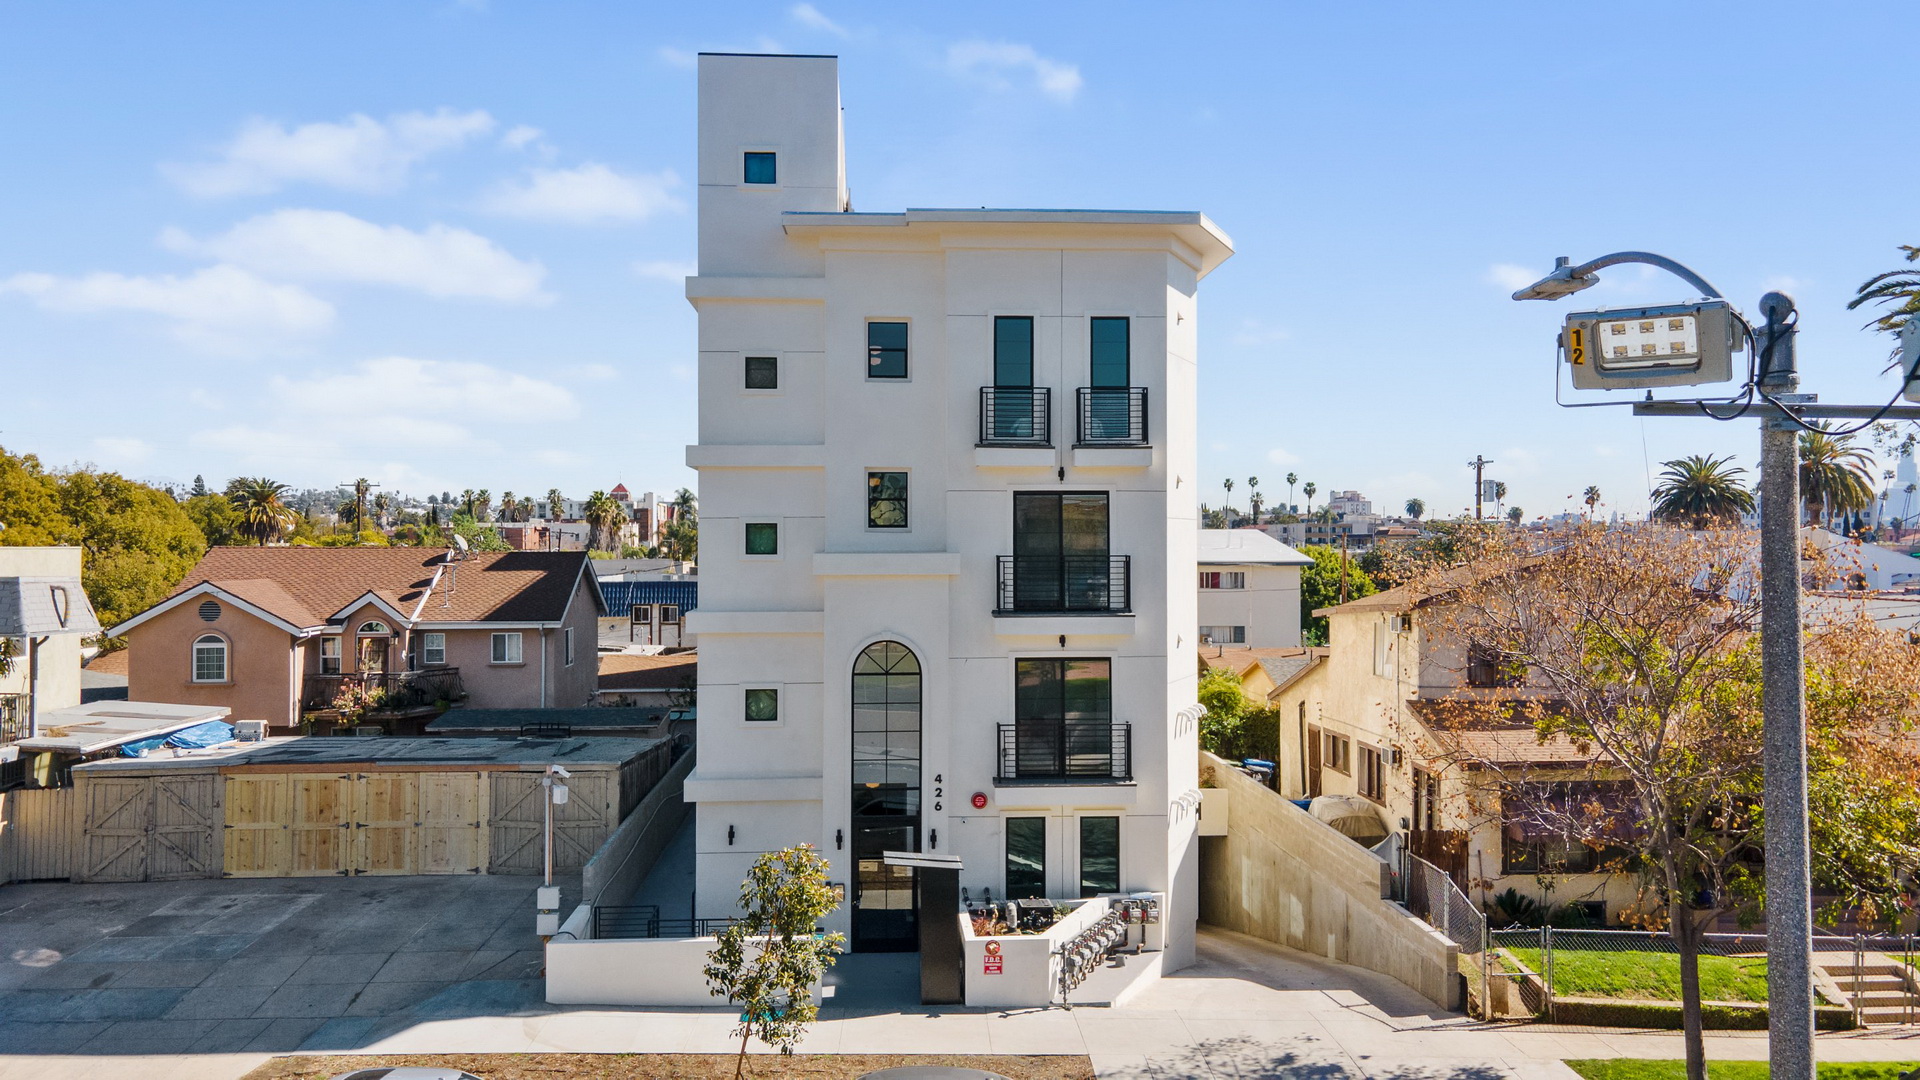  Townhouses for rent with parking in Koreatown